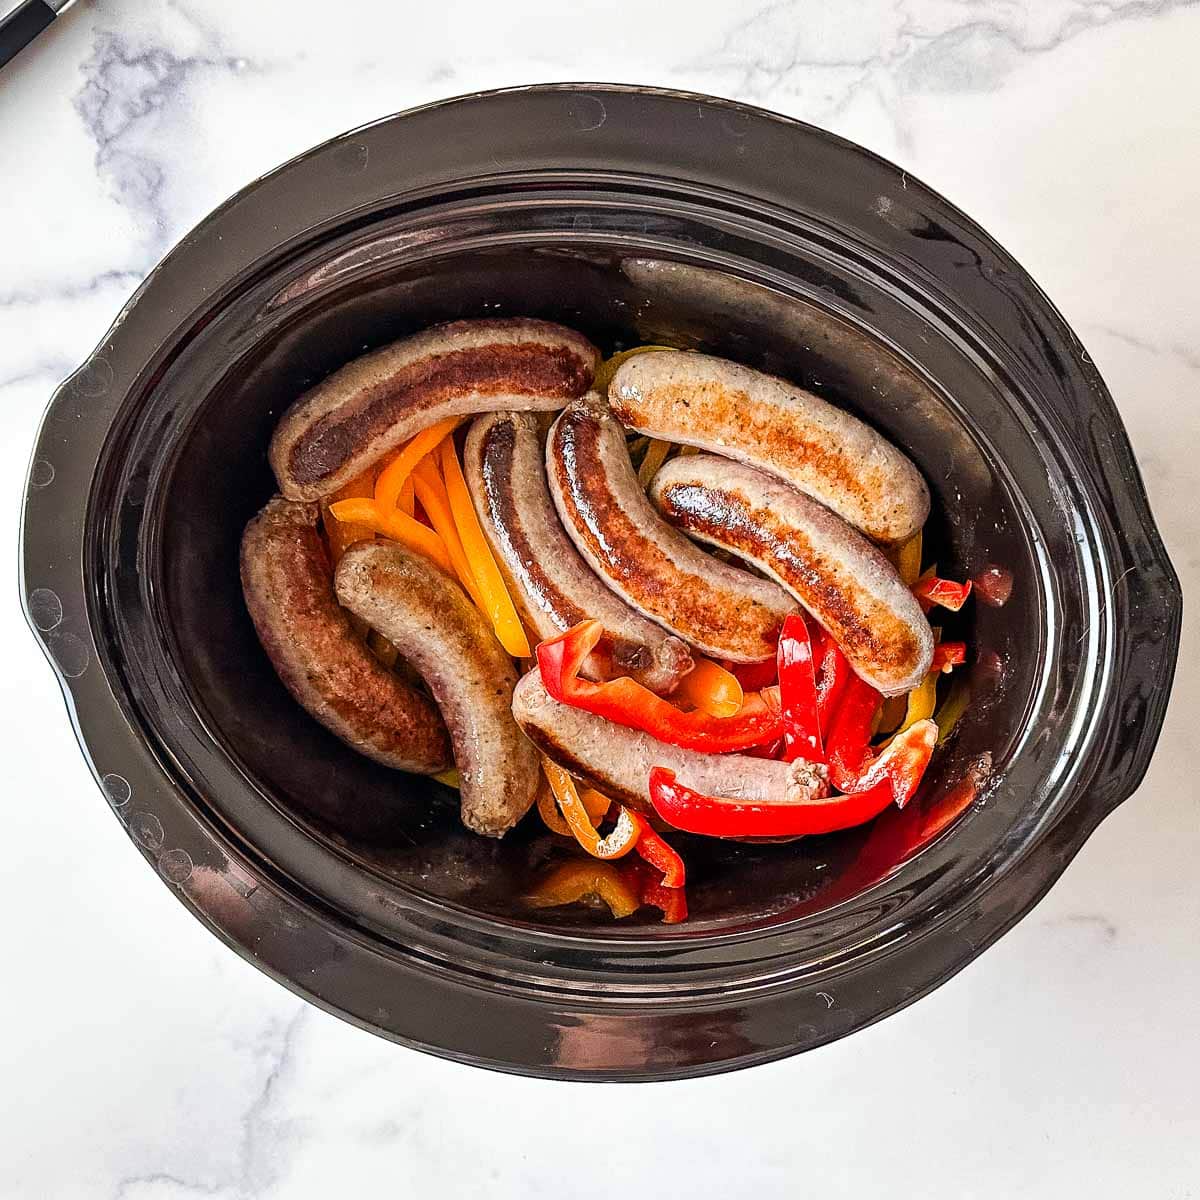 Sausage and peppers in a crock pot.